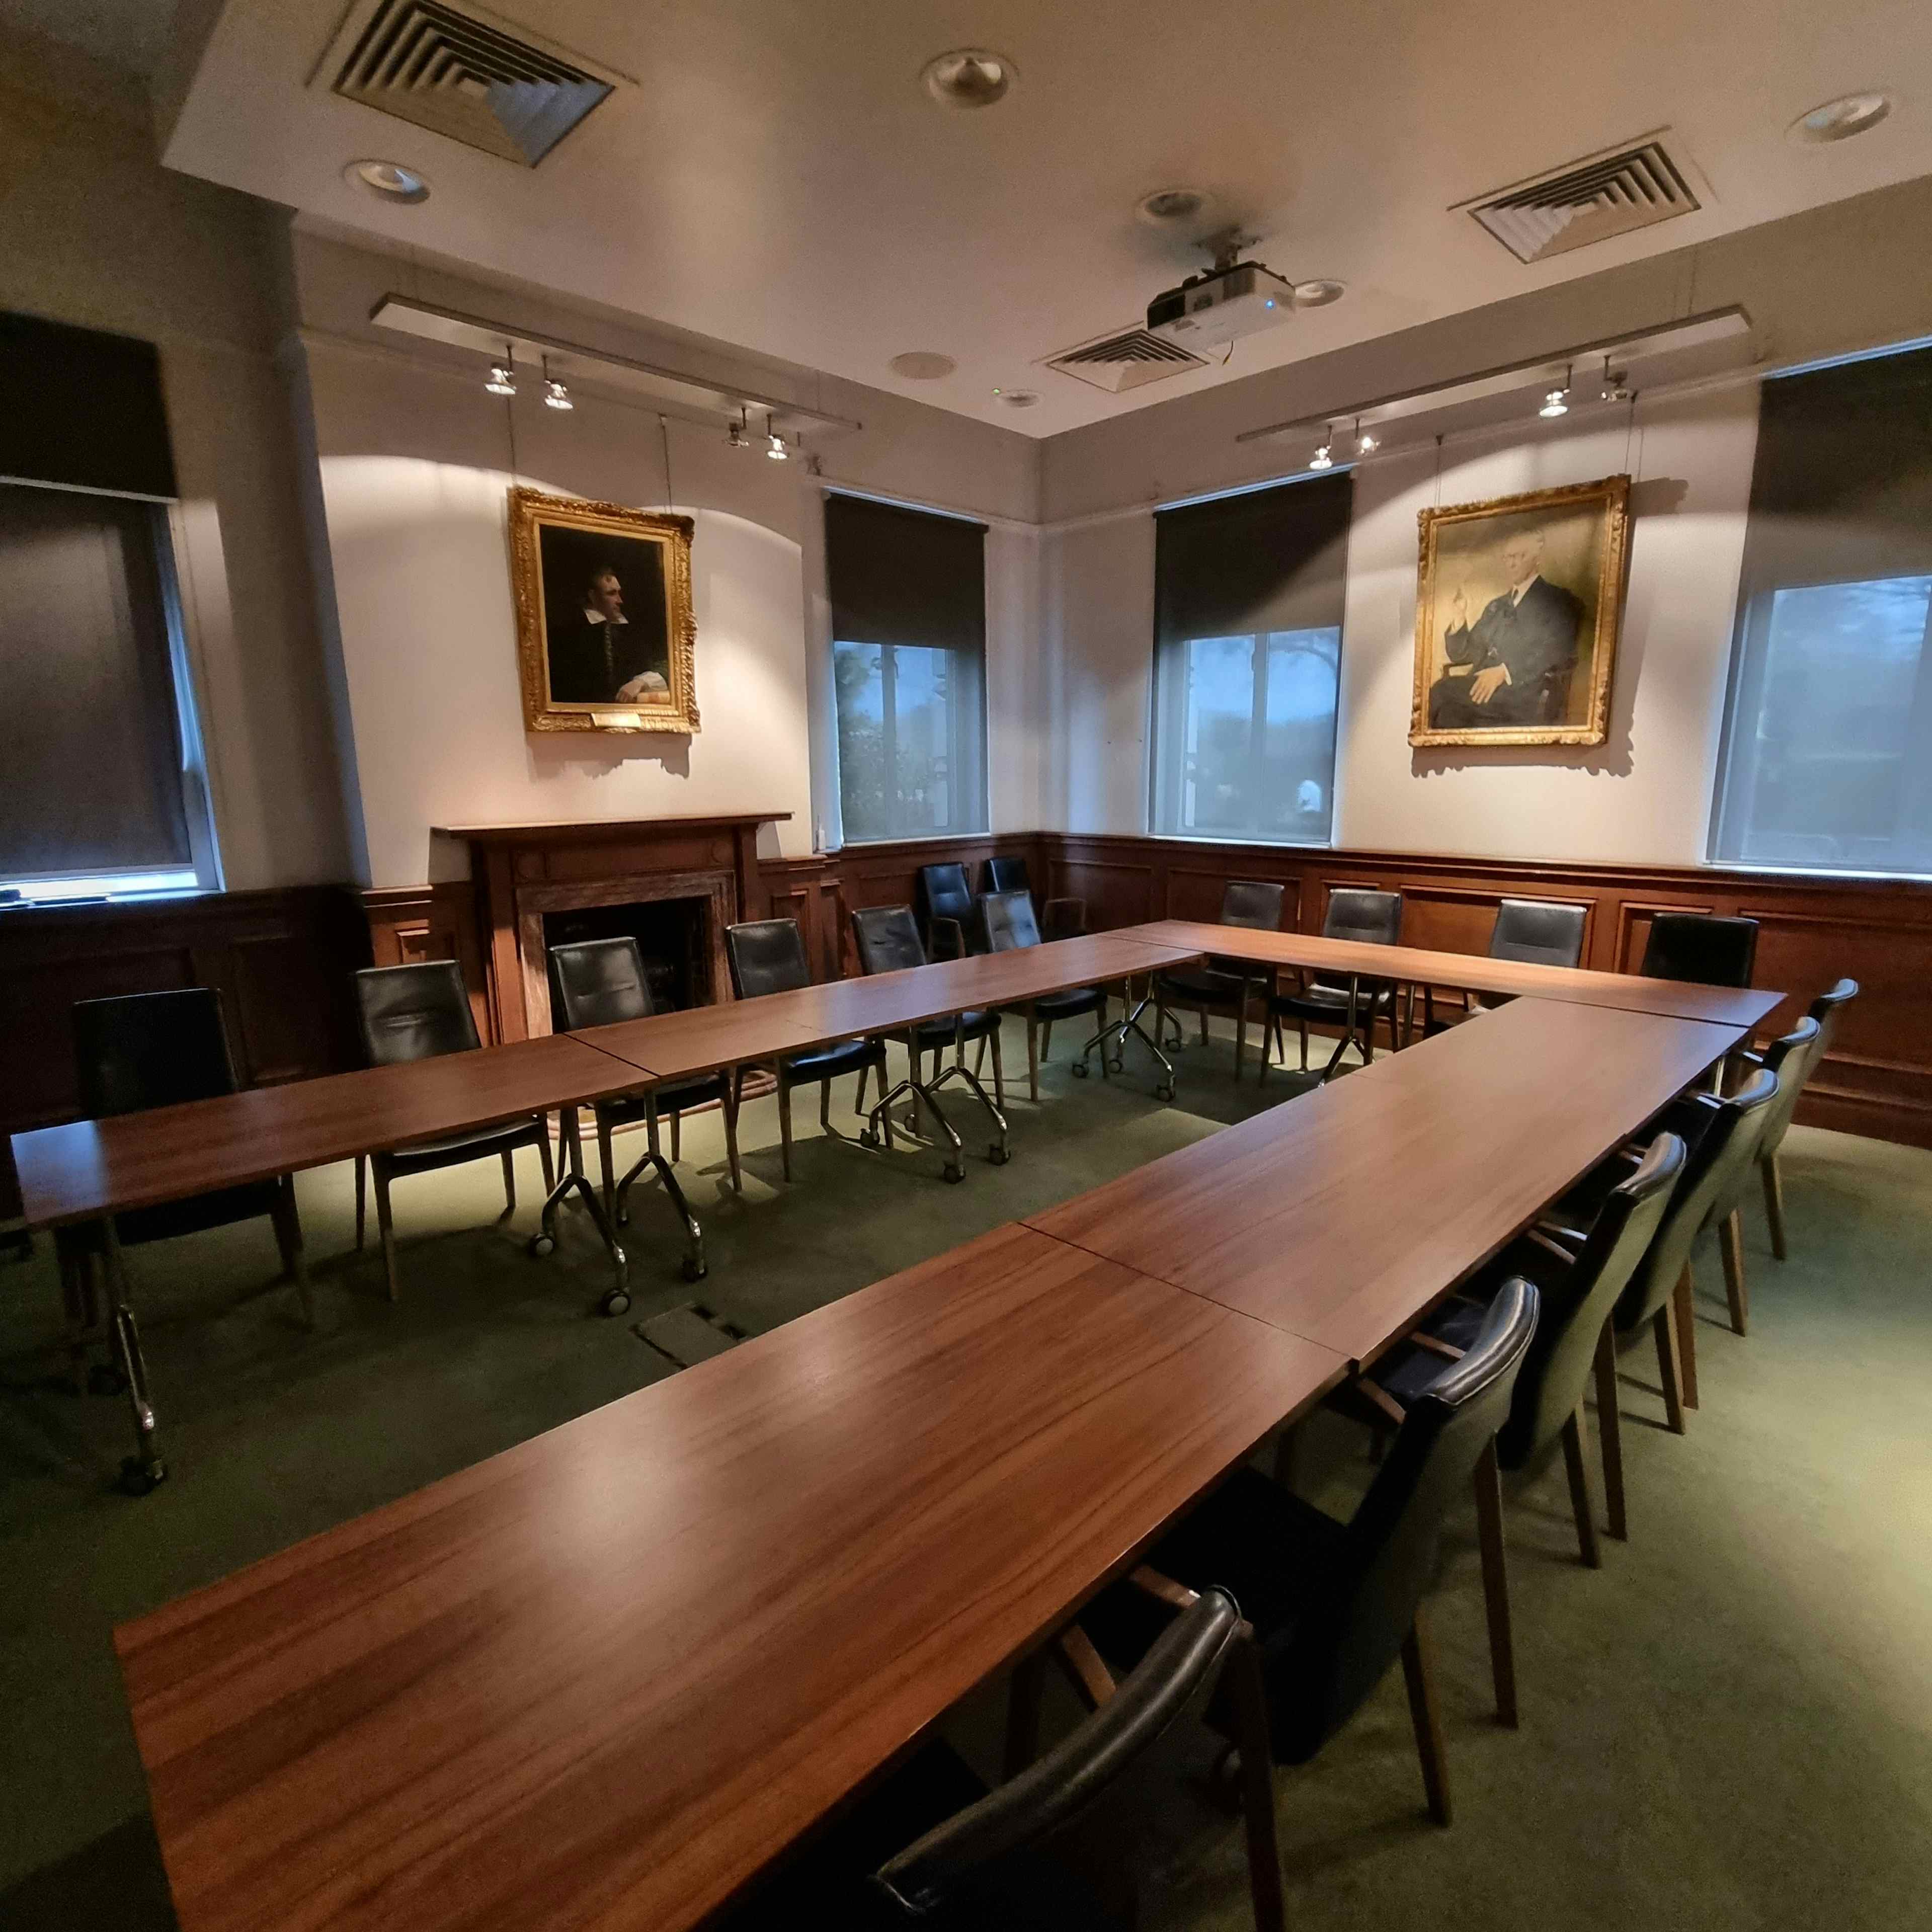 ZSL London Zoo - Council Room image 3